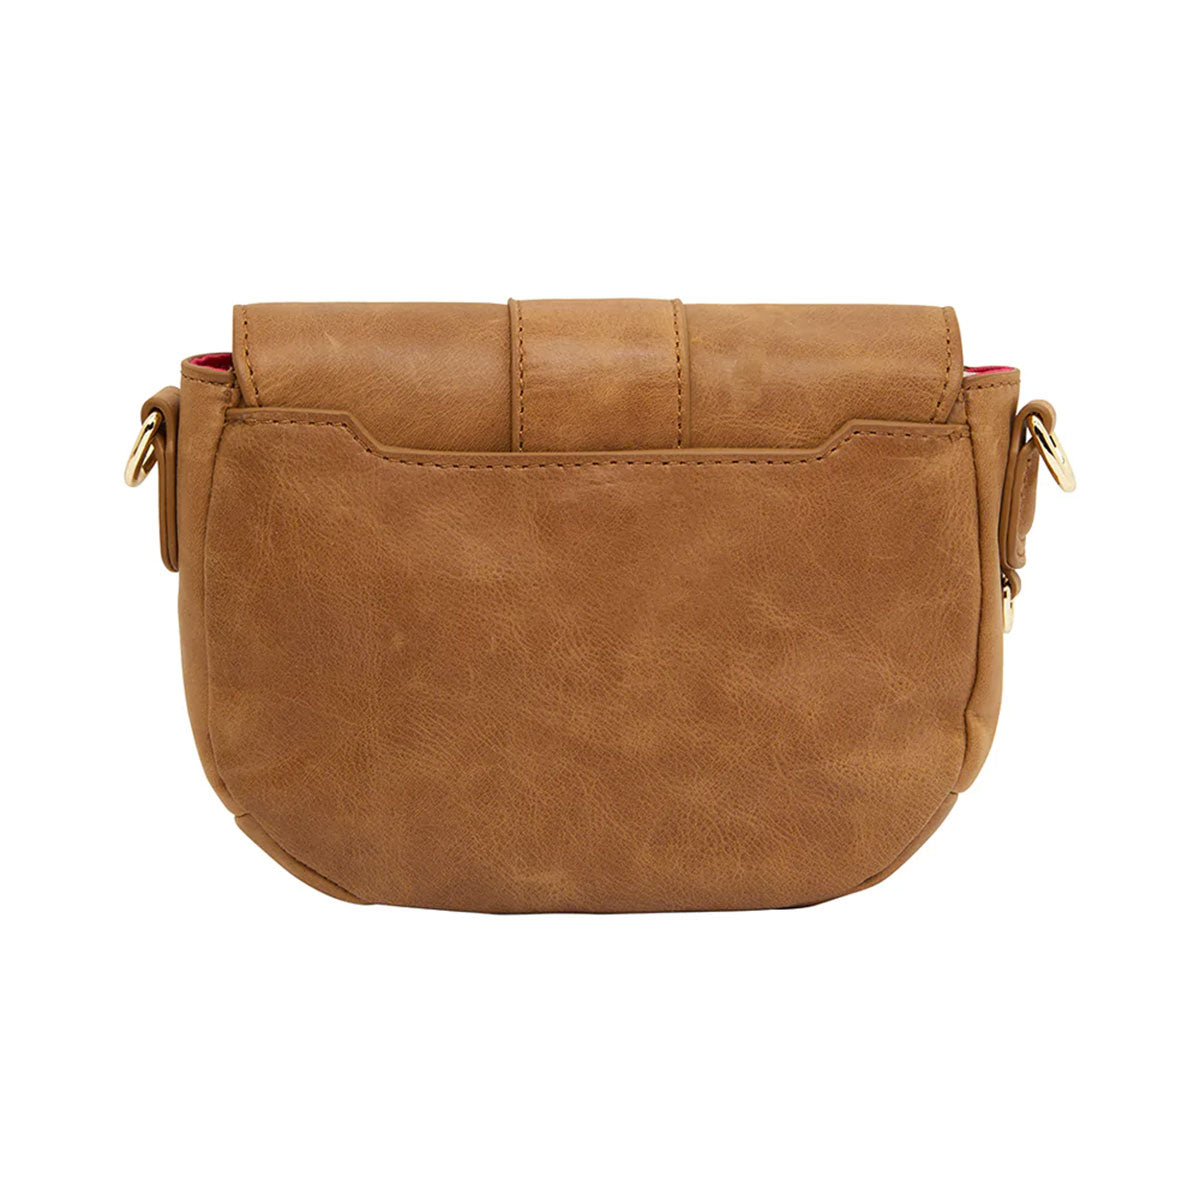 Suede leather bag in dark CAMEL BROWN Tobacco color crossbody bag in   Handmade suede bags by Good Times Barcelona